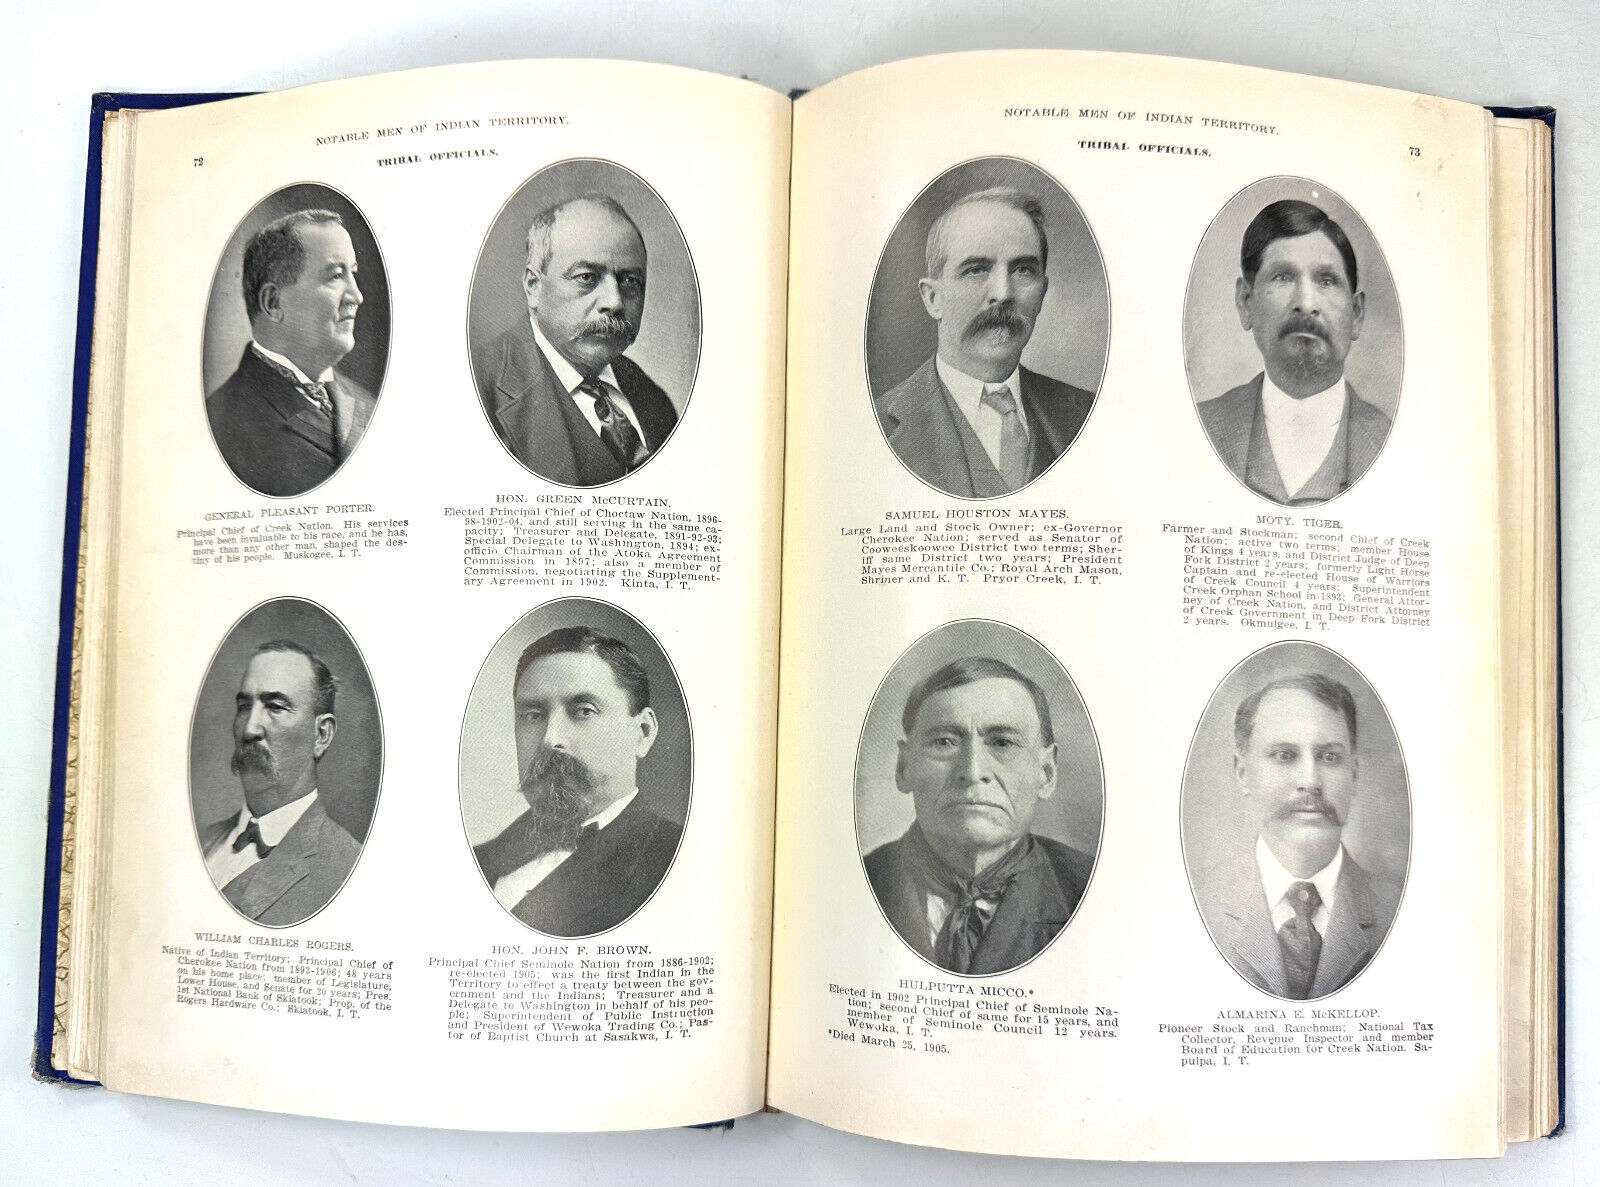 1904-1905 NOTABLE MEN OF IT AT THE BEGINNING OF THE 20th CENTURY (MUSKOGEE, IT)